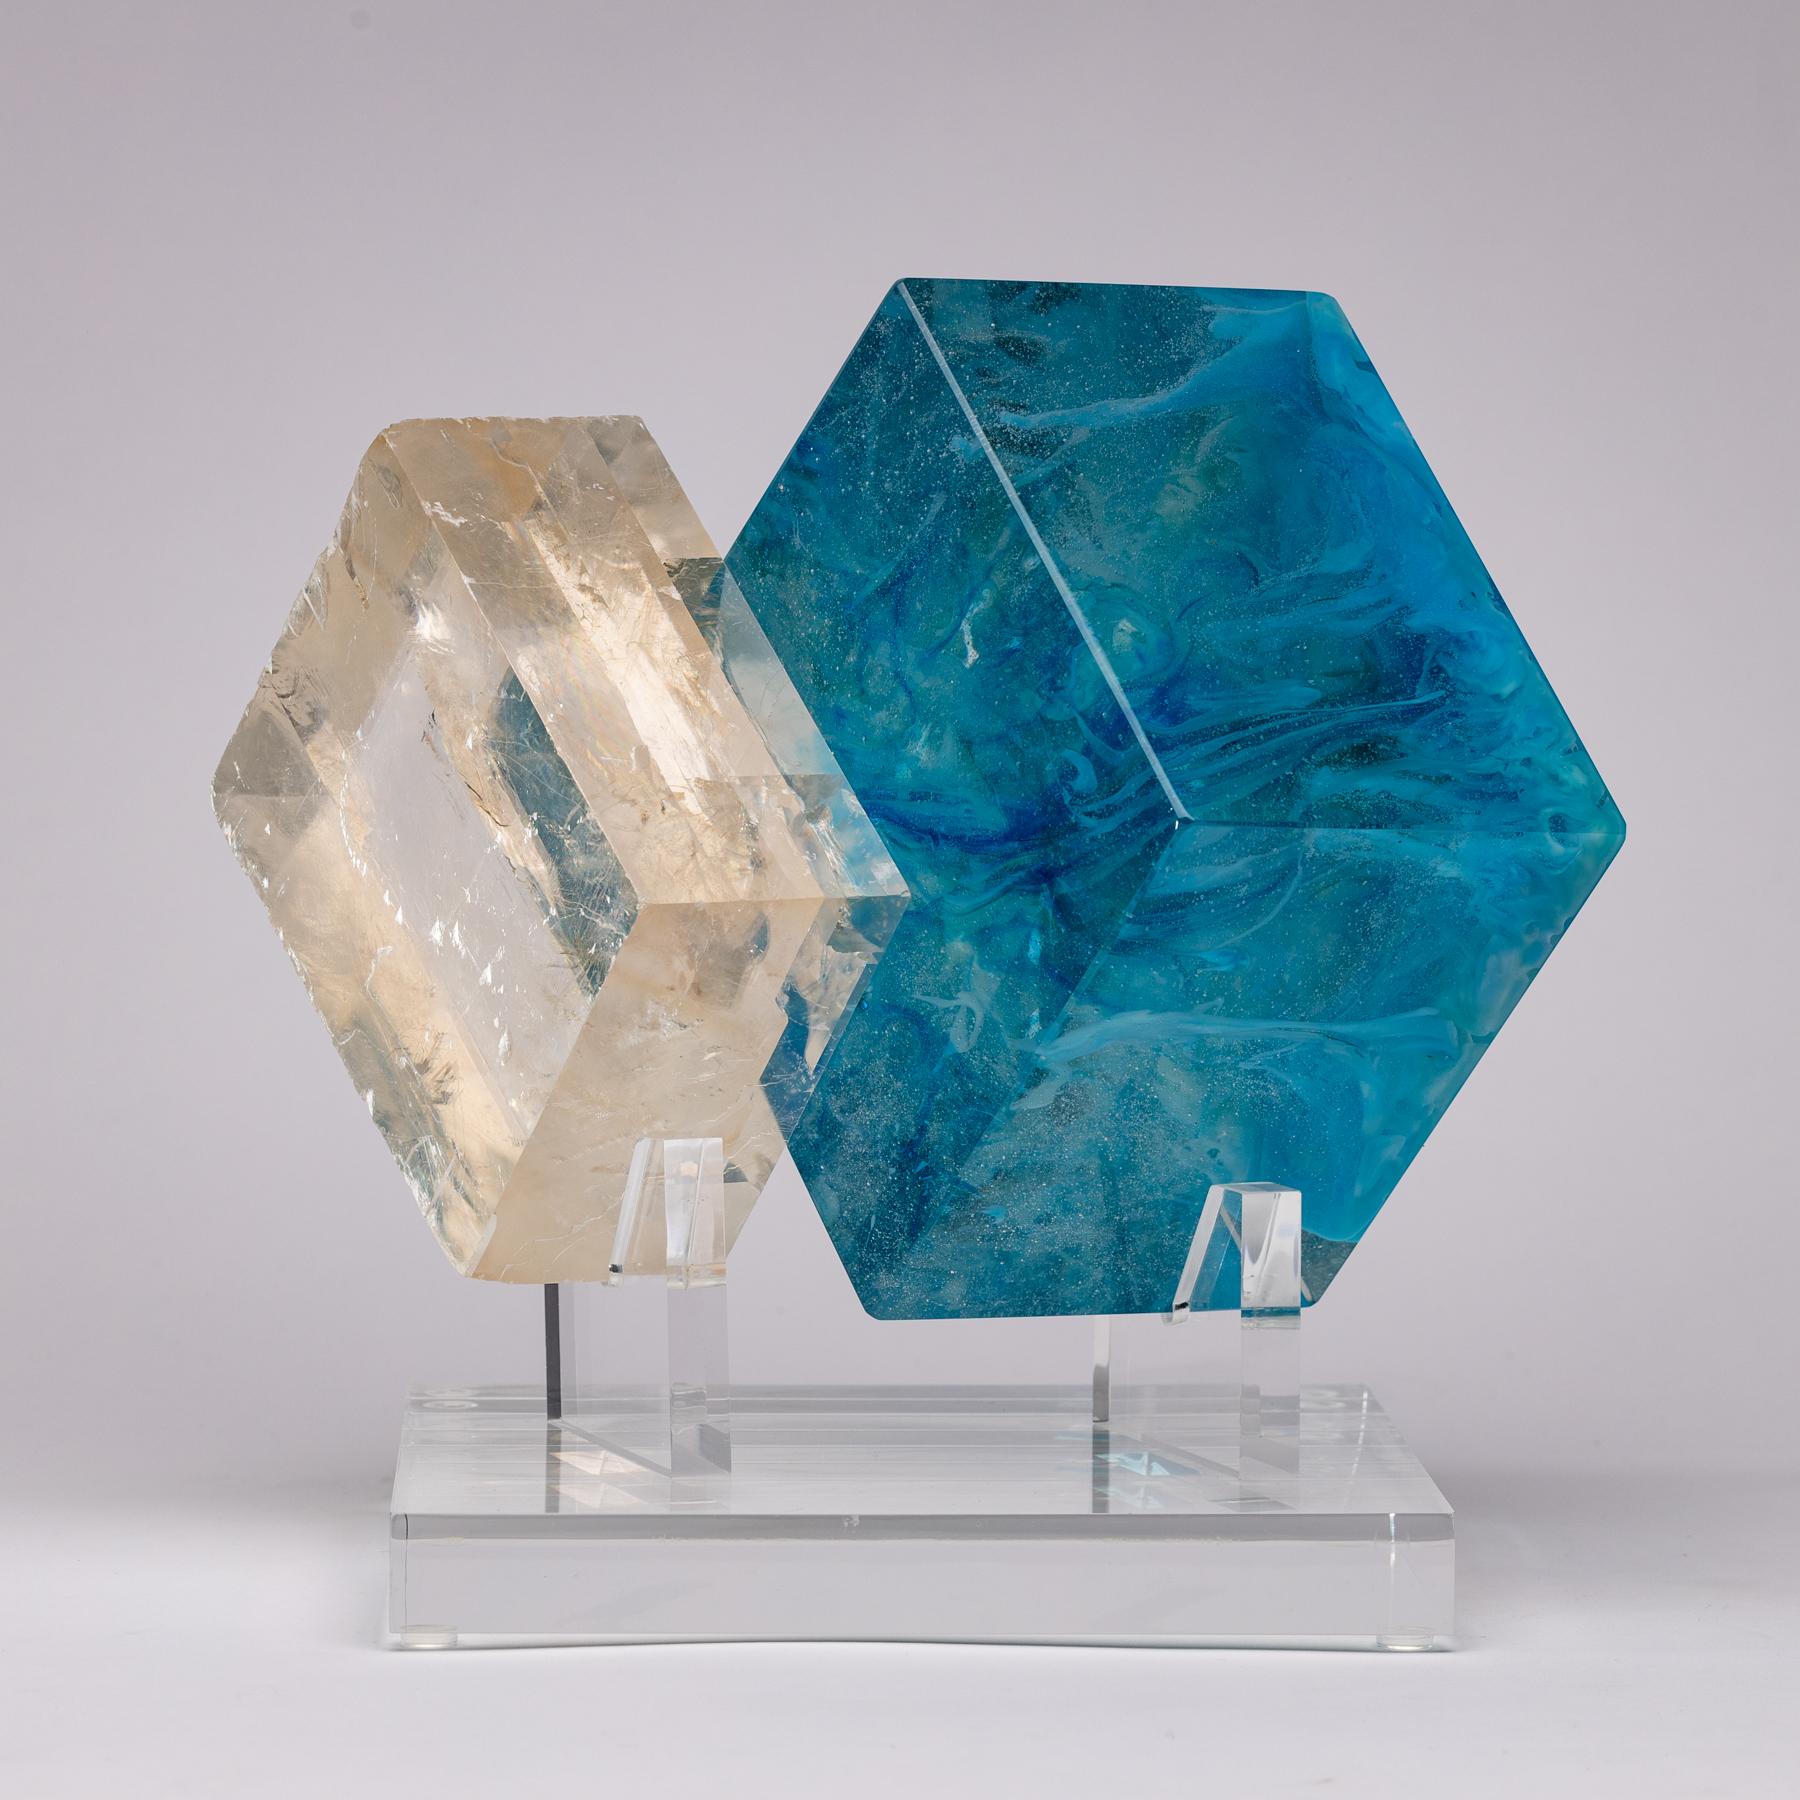 Cubes blues, optical calcite and glass sculpture from TYME collection, a collaboration by Orfeo Quagliata and Ernesto Durán

TYME collection 
A dance between purity and detail bring a creation of unique pieces merging nature’s gems and human